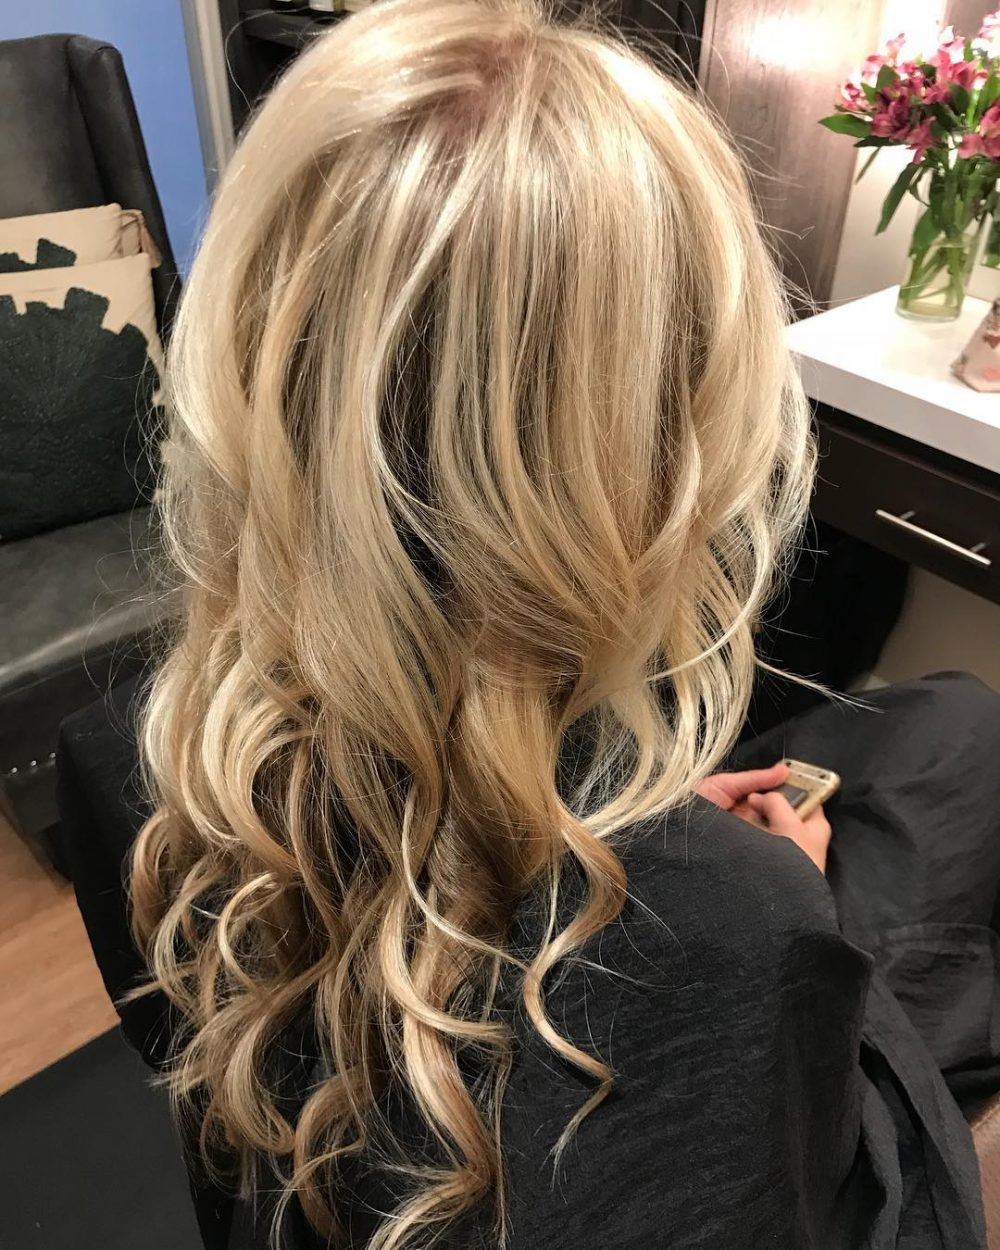 Curled Hairstyle With Soft Layers